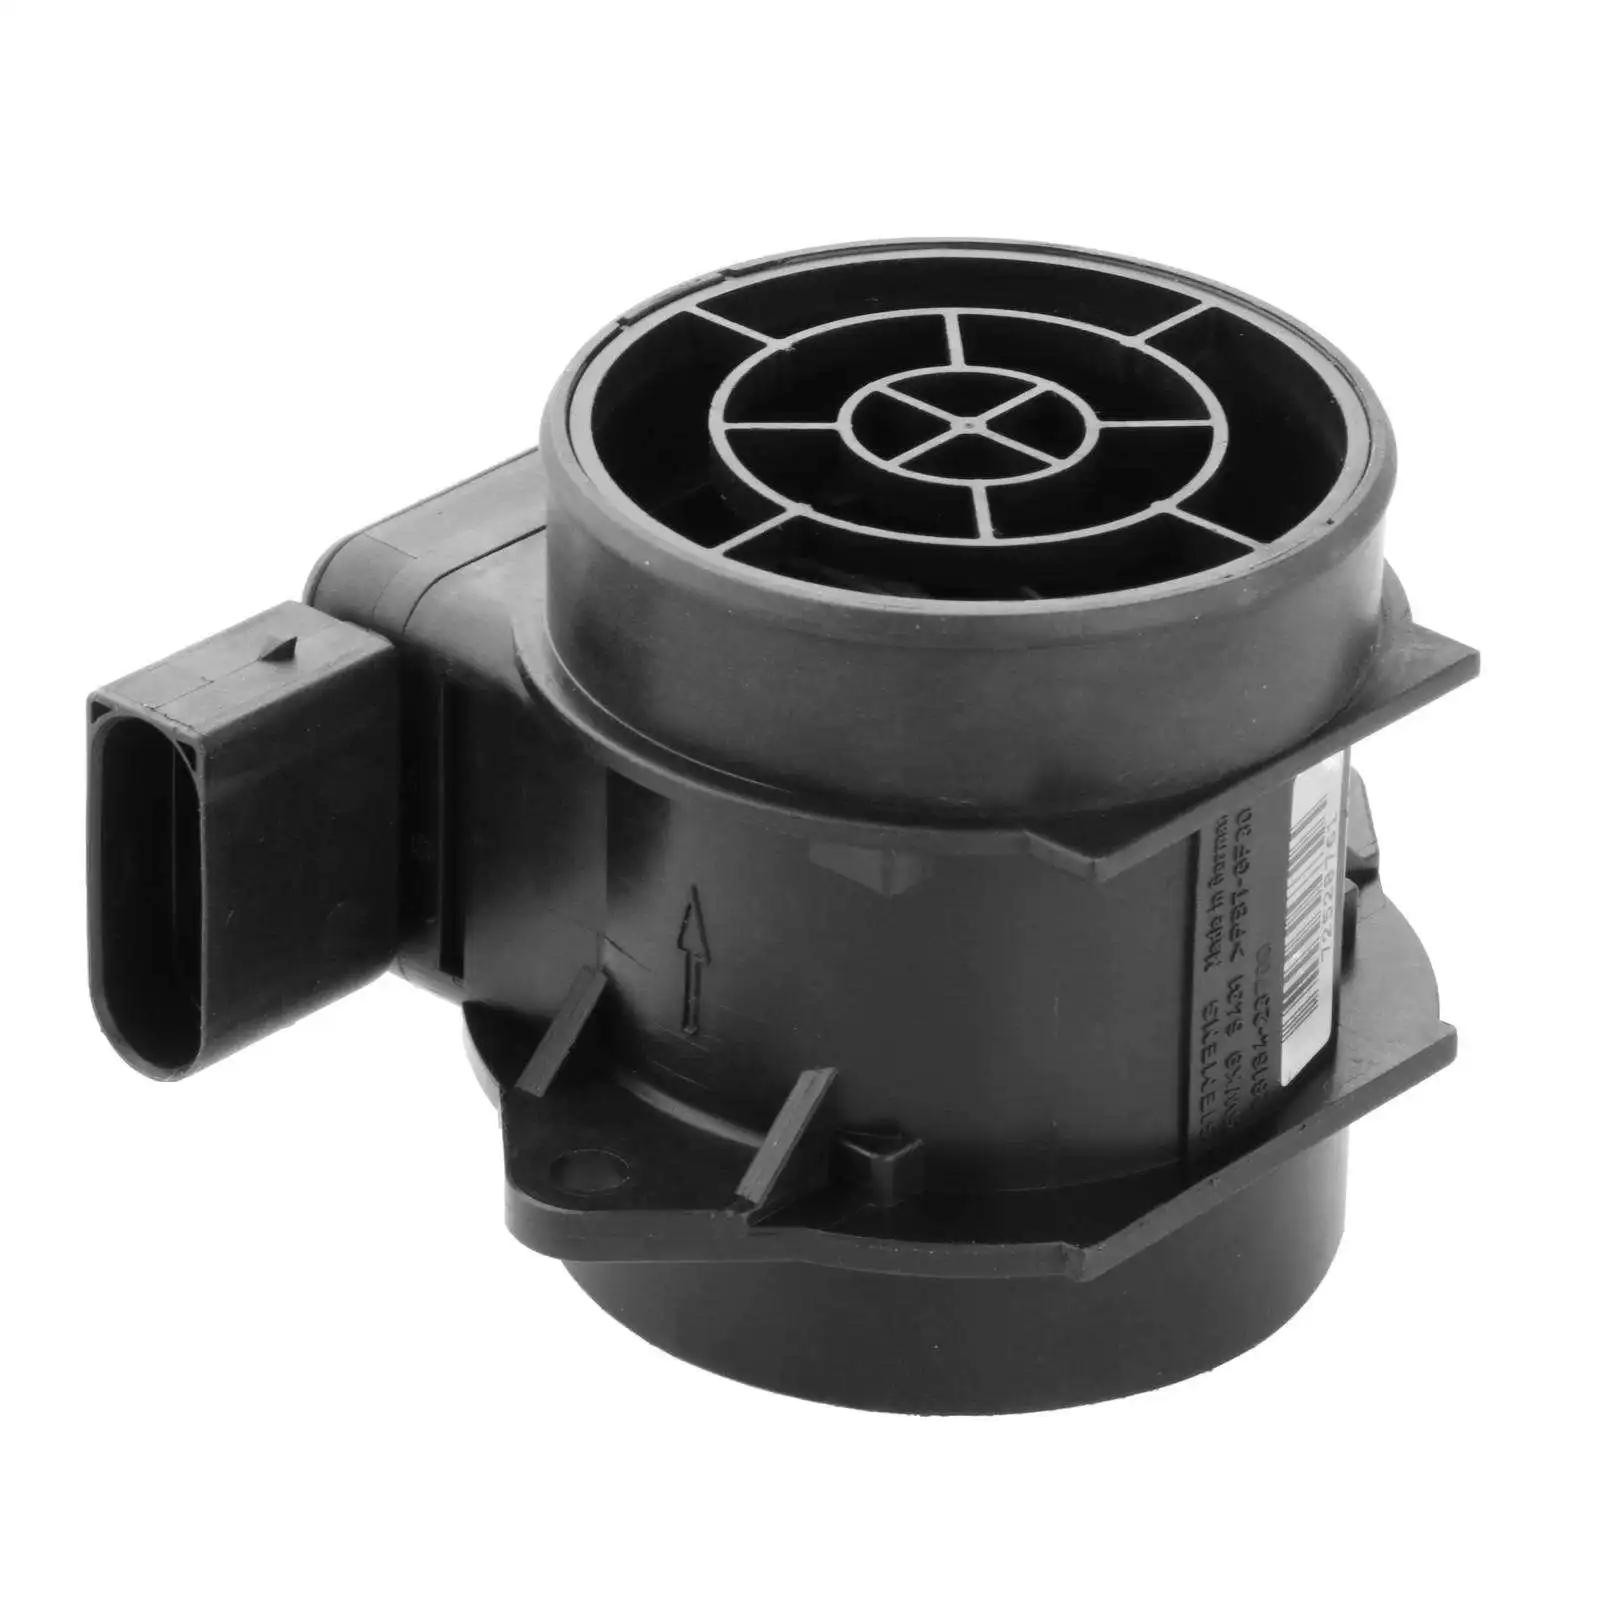 Mass Air Flow Sensor Assembly Maf Sensor for Hyundai Accent Replace Accessories Parts 28164-23700